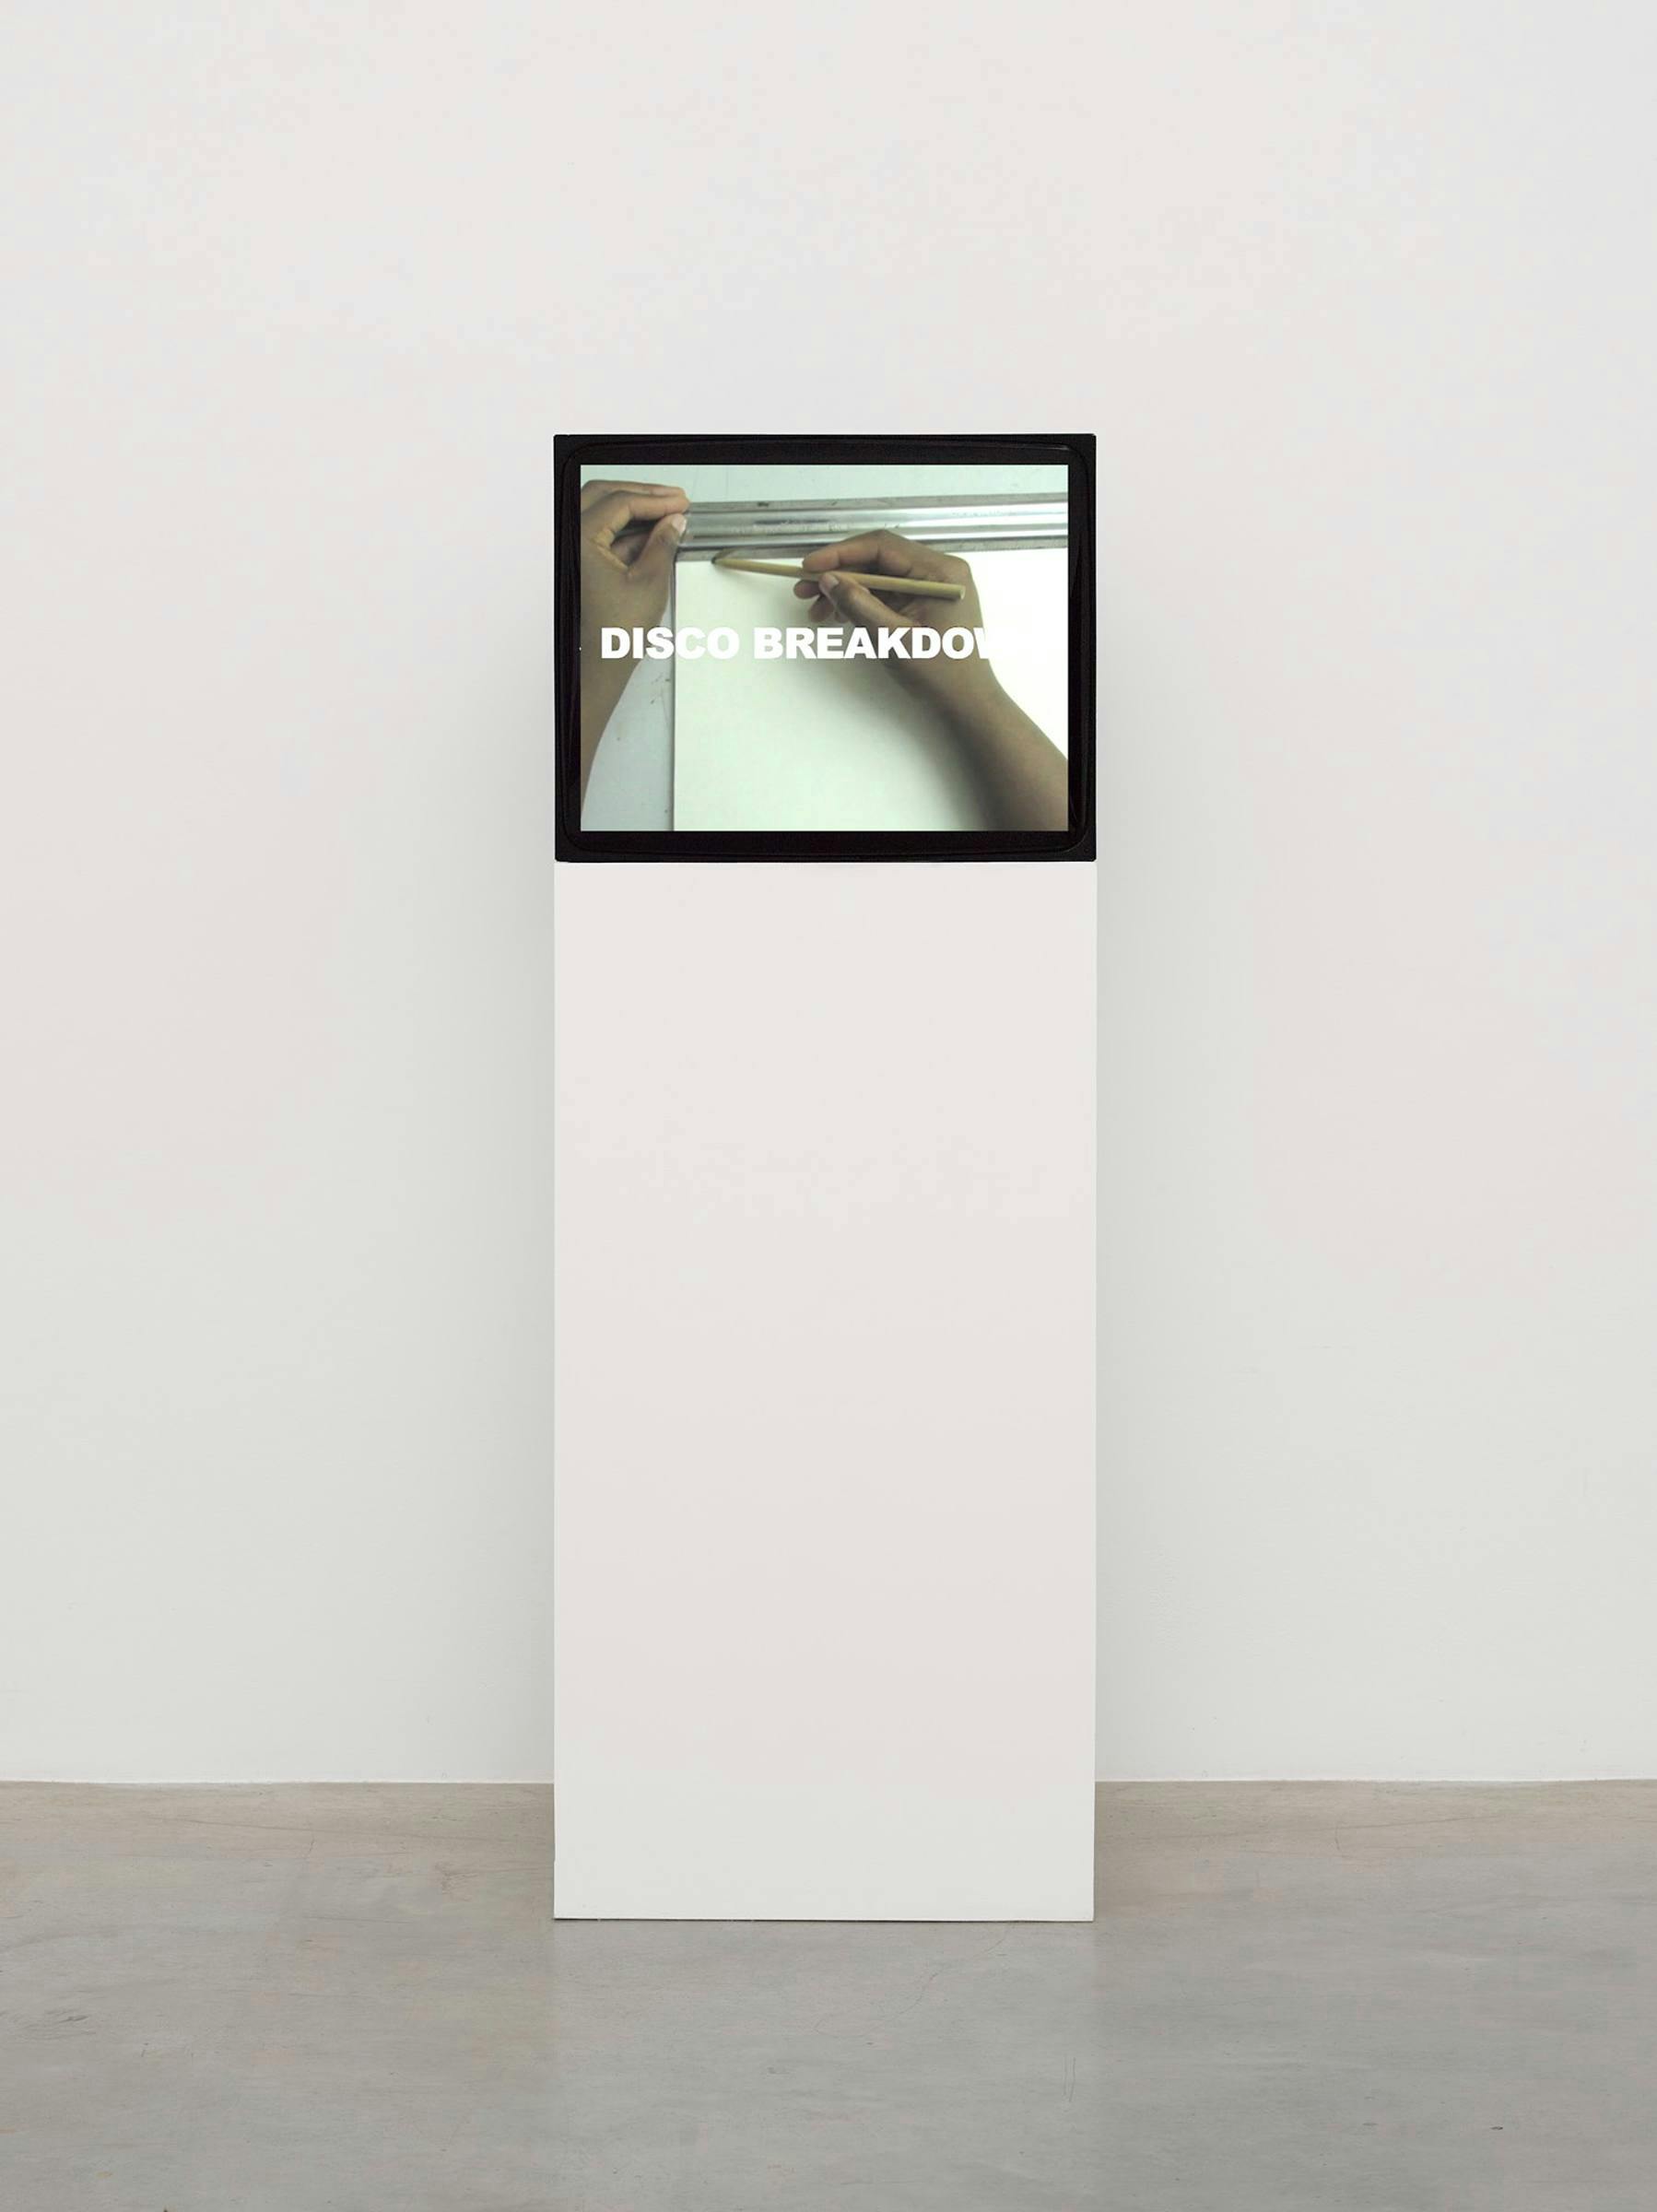 A TV on top of a white plinth in a white gallery space